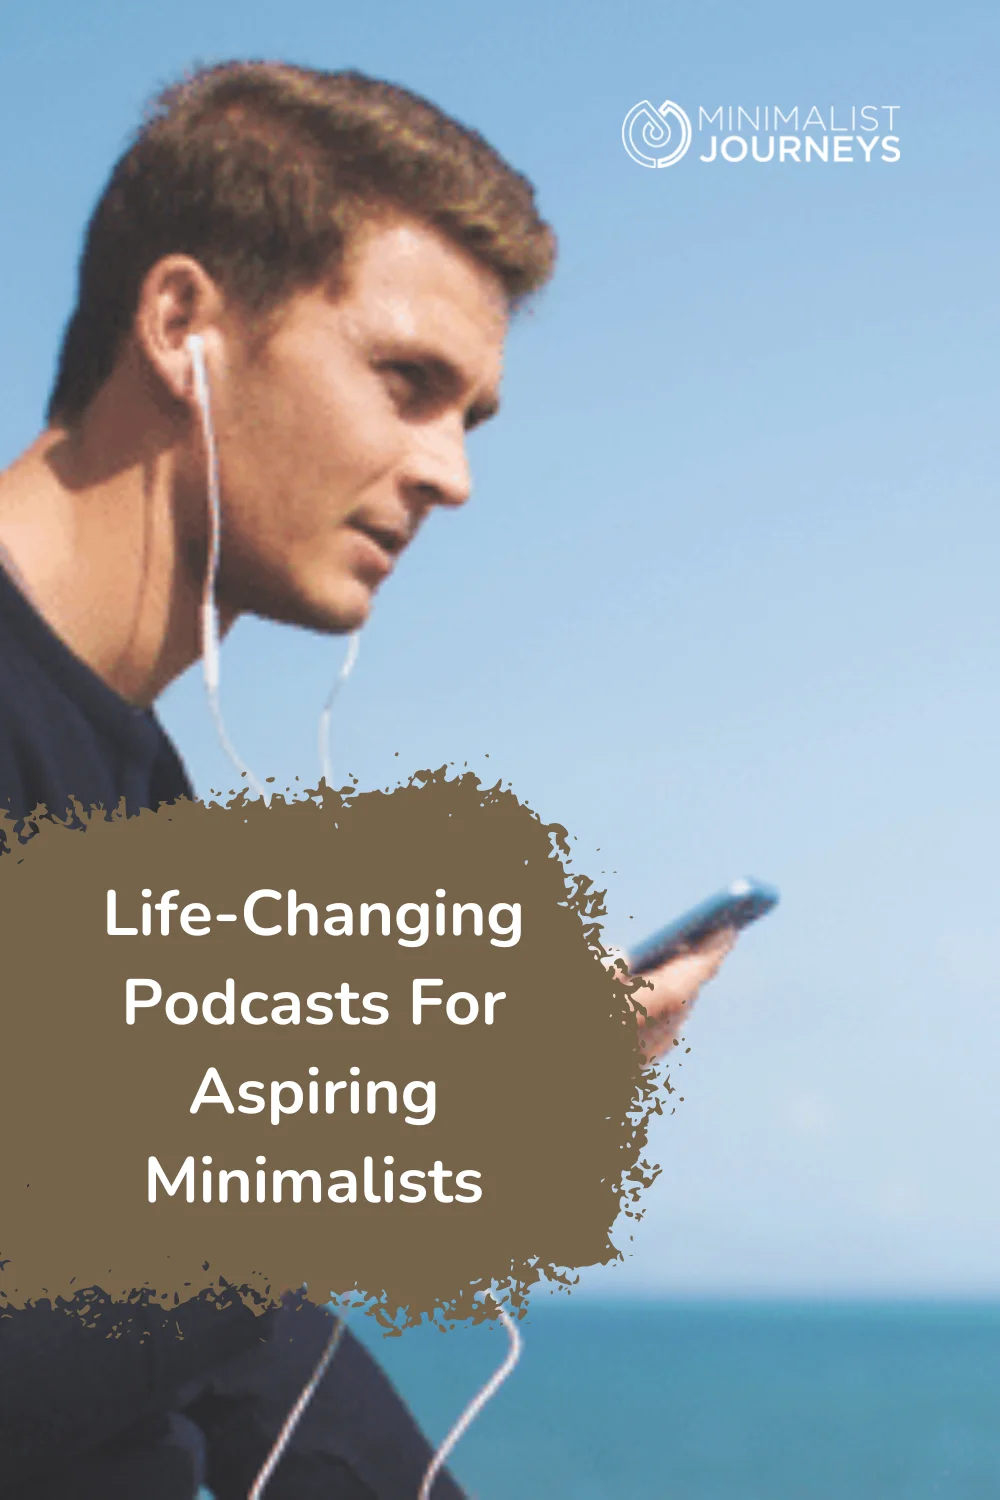 12 Life-Changing Podcasts For Aspiring Minimalists in 2023